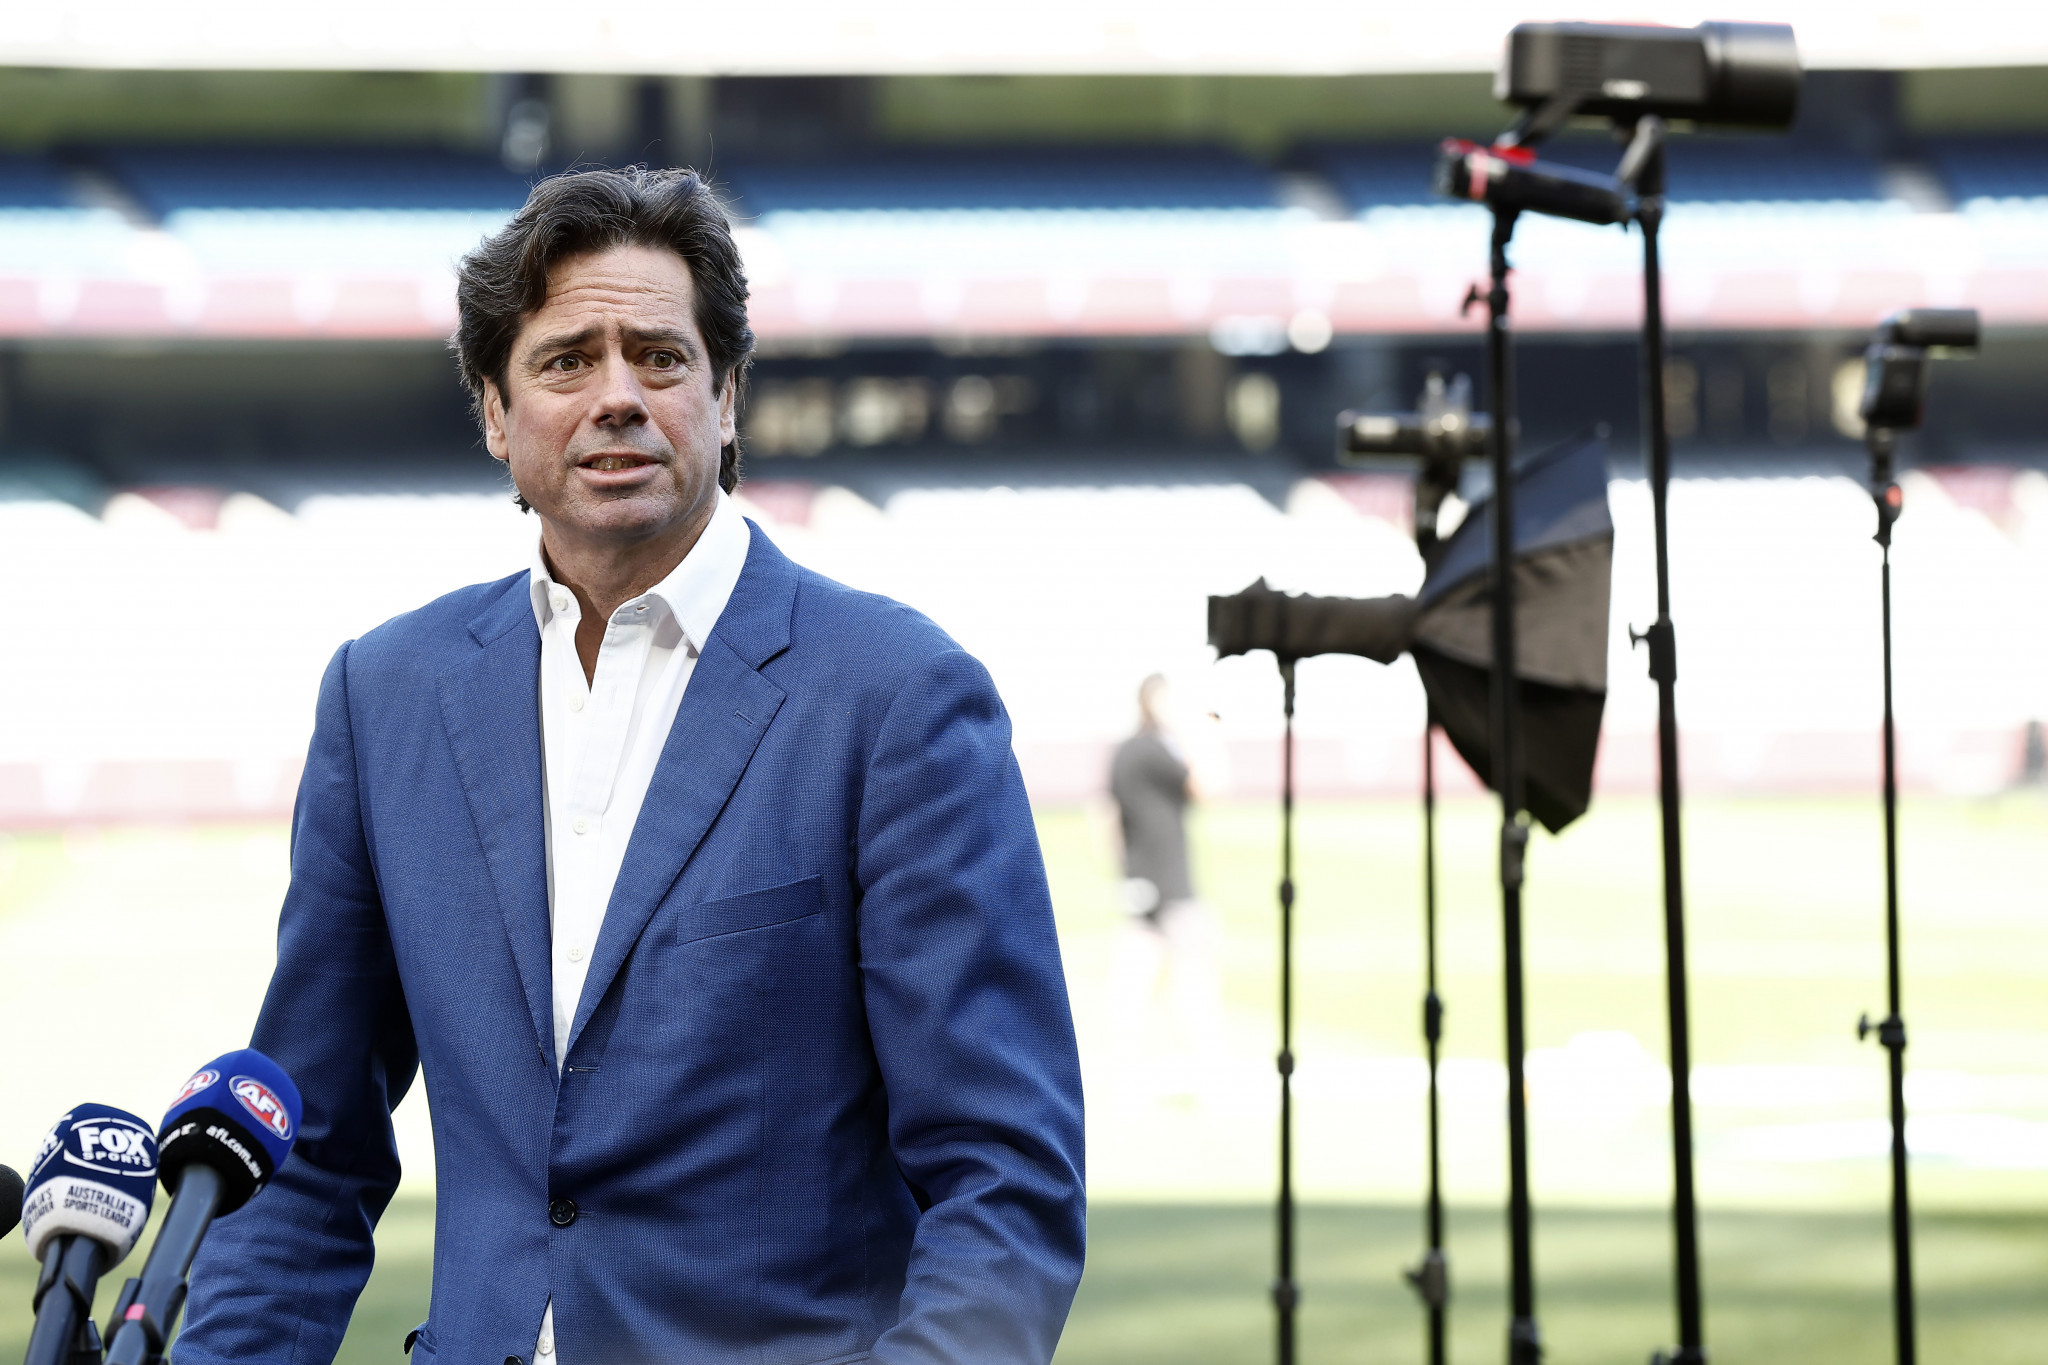 Gillon McLachlan has been viewed as a potential Brisbane 2032 chief executive ©Getty Images